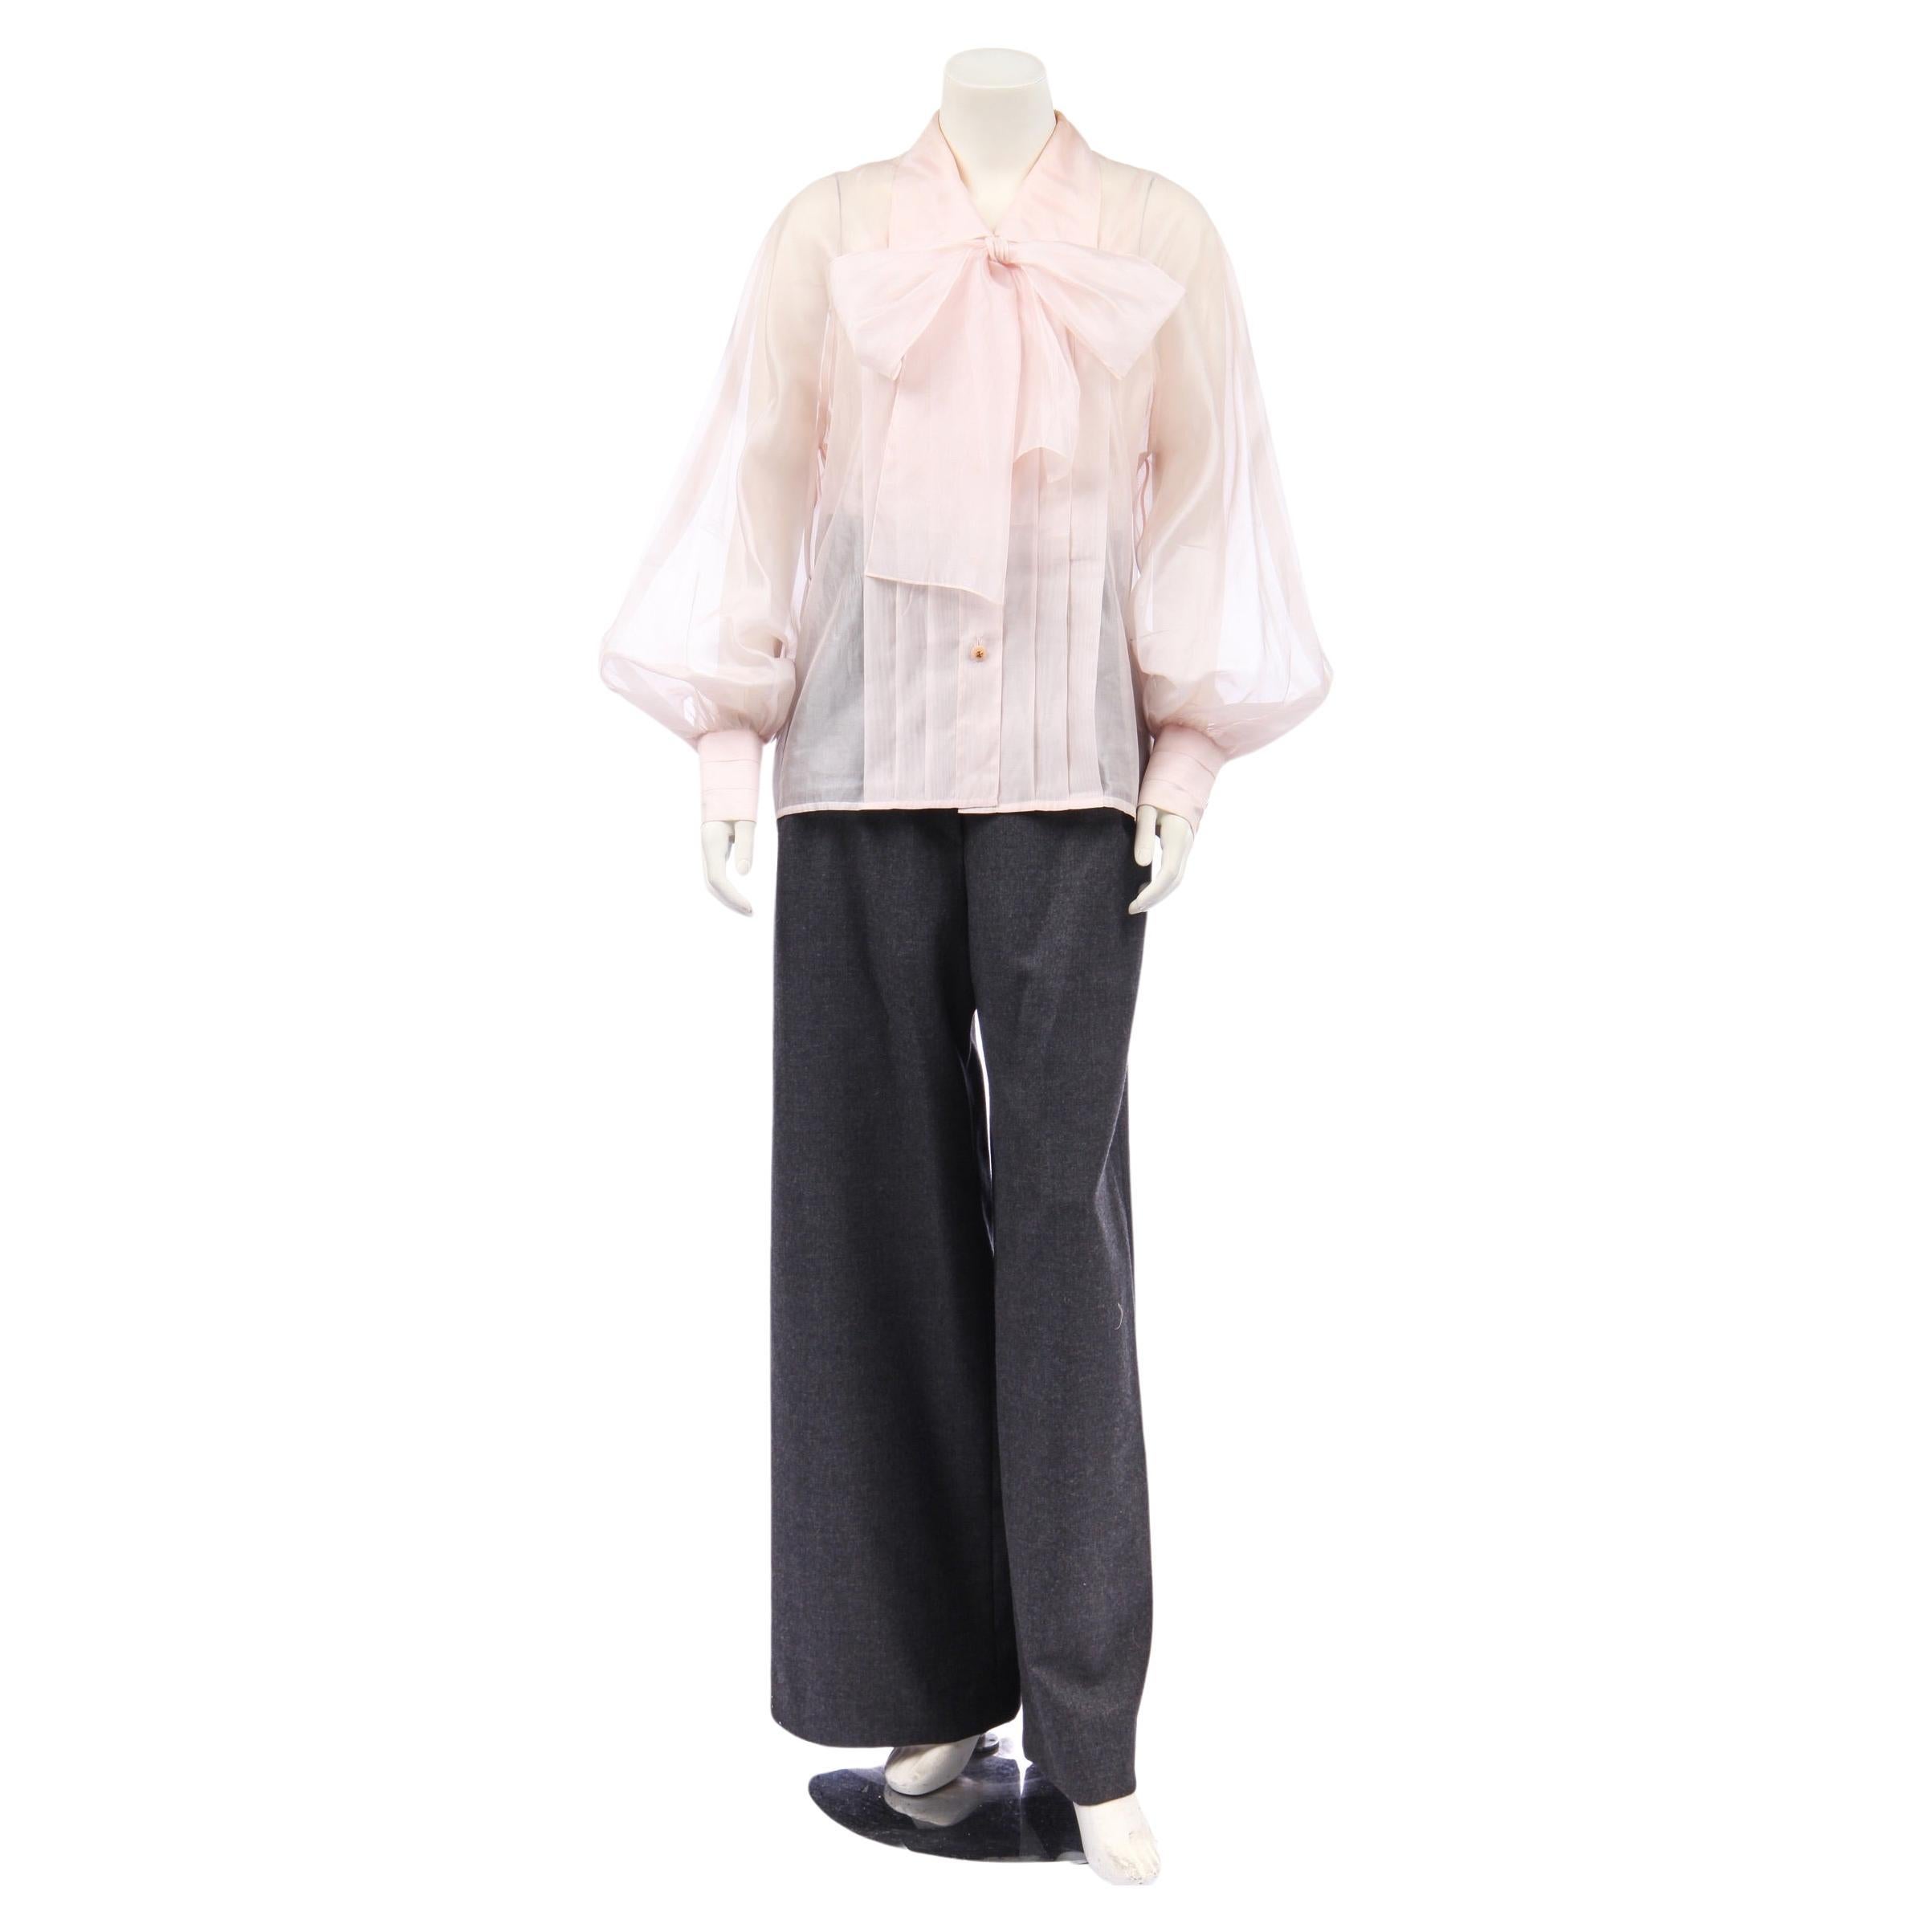 - Chanel
- Karl Lagerfeld Era
- 1980s
- Blouse & Camisole
- Detachable Bow
- Blush Pink
- Silk Organza
- Pleated Detail on Front and Back
- Balloon Sleeves
- Pleated Button Cuffs
- Pink Buttons with Gold Shamrock Detail
- Made in France
- Sold by